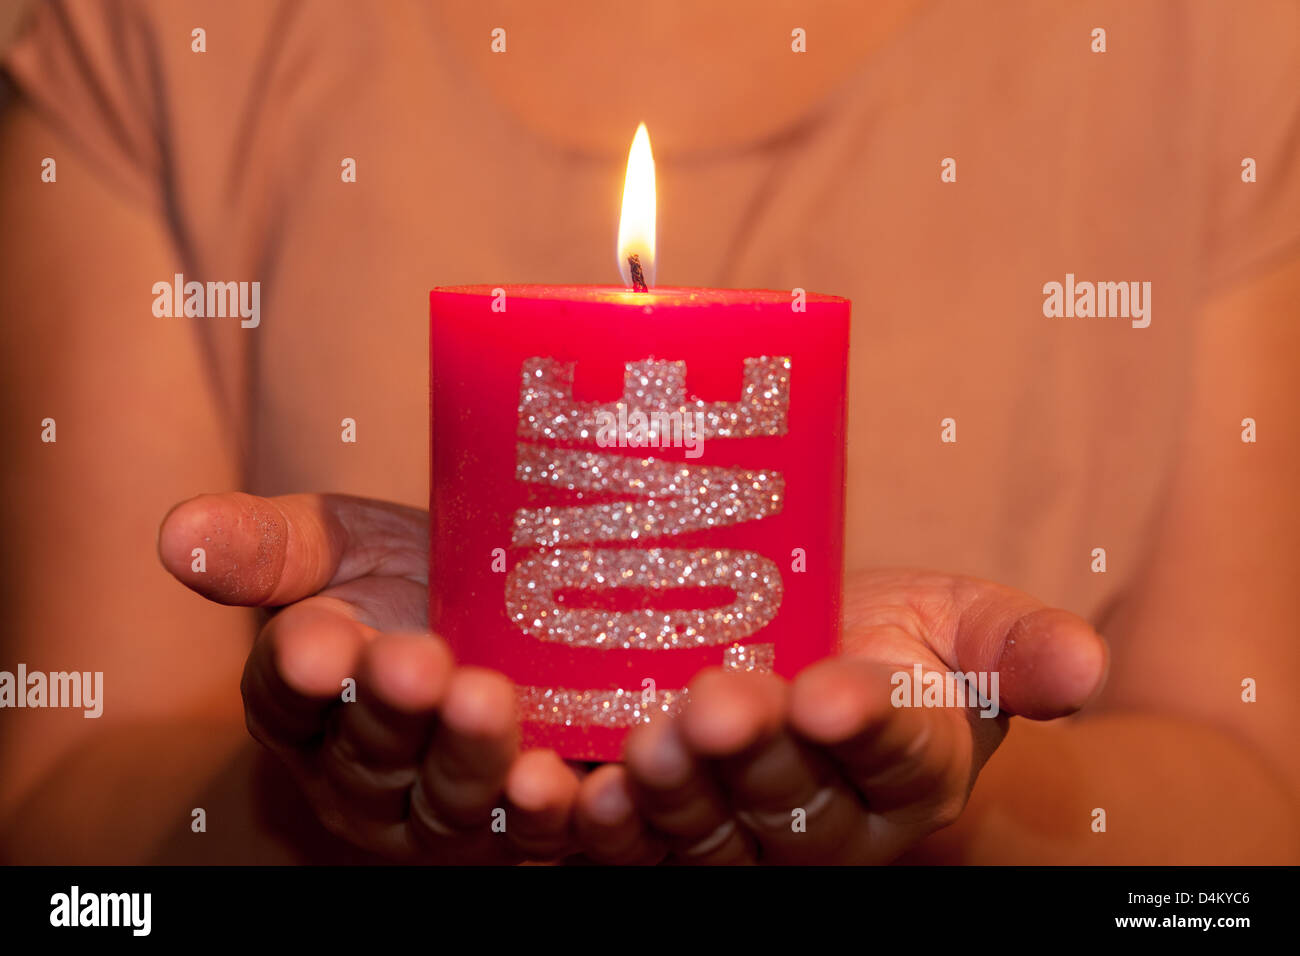 Two hands holding a big red candle Stock Photo